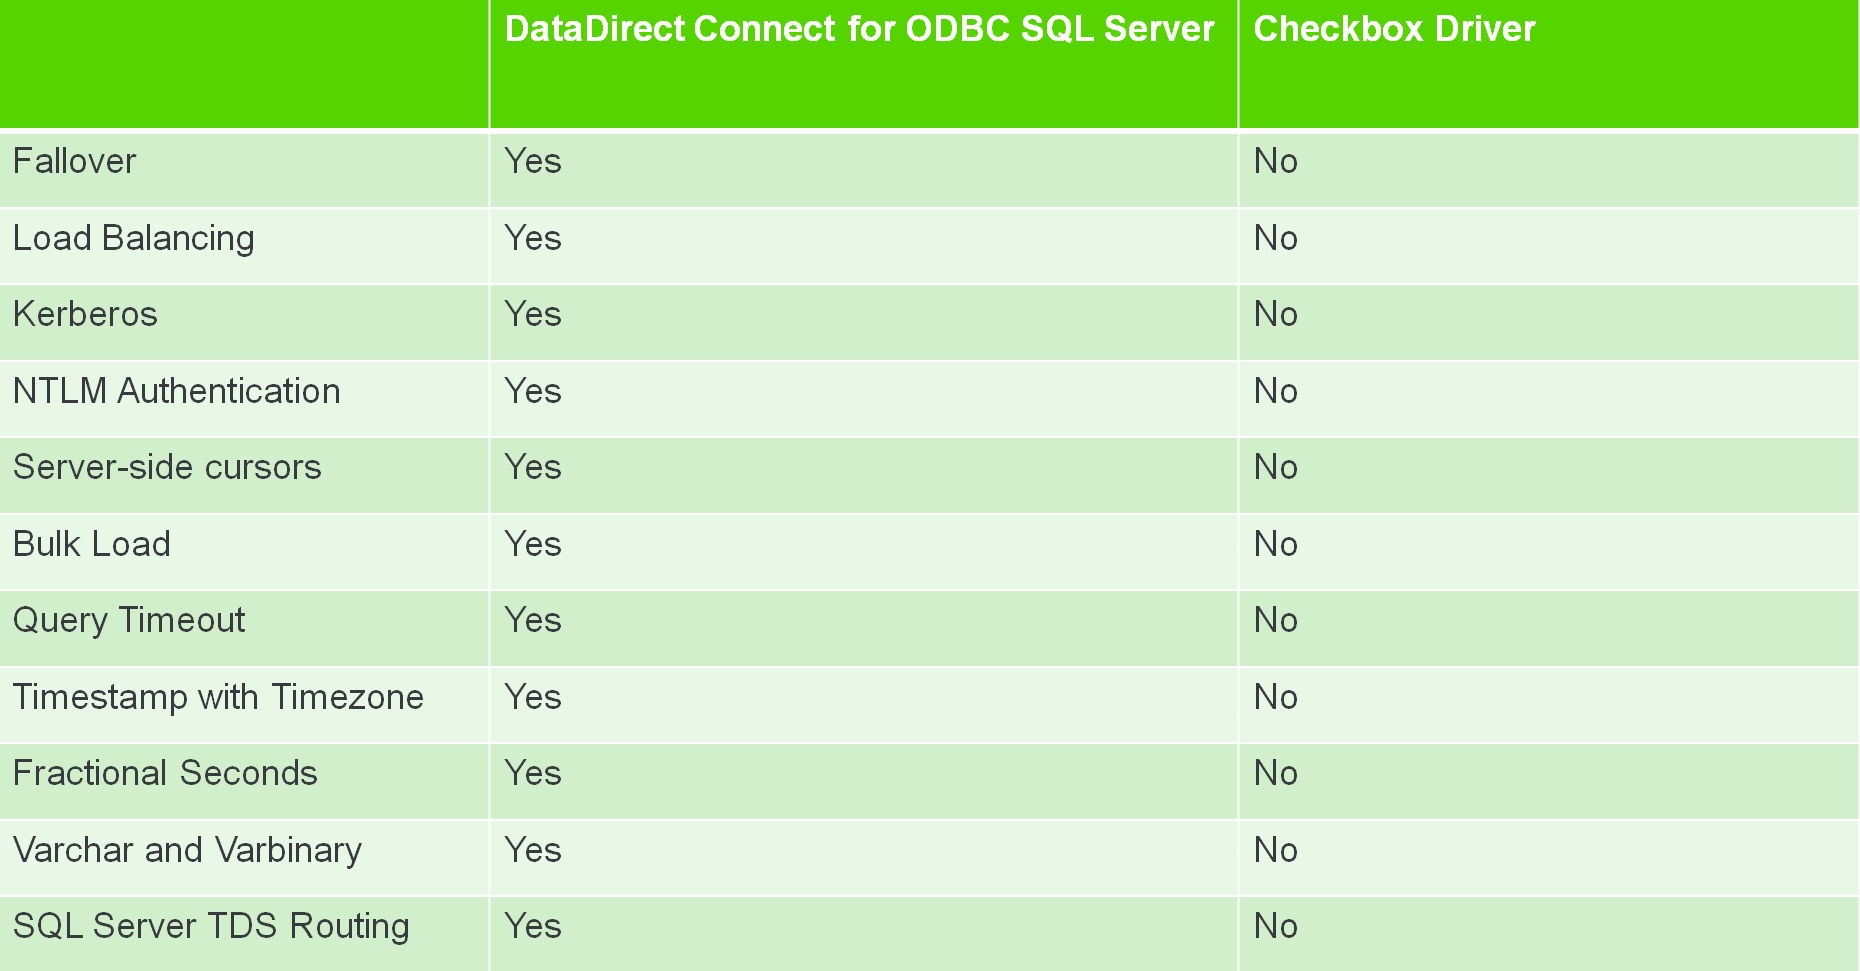 datadirect-connect-for-odbc-sql-server-versus-checkbox-driver.png